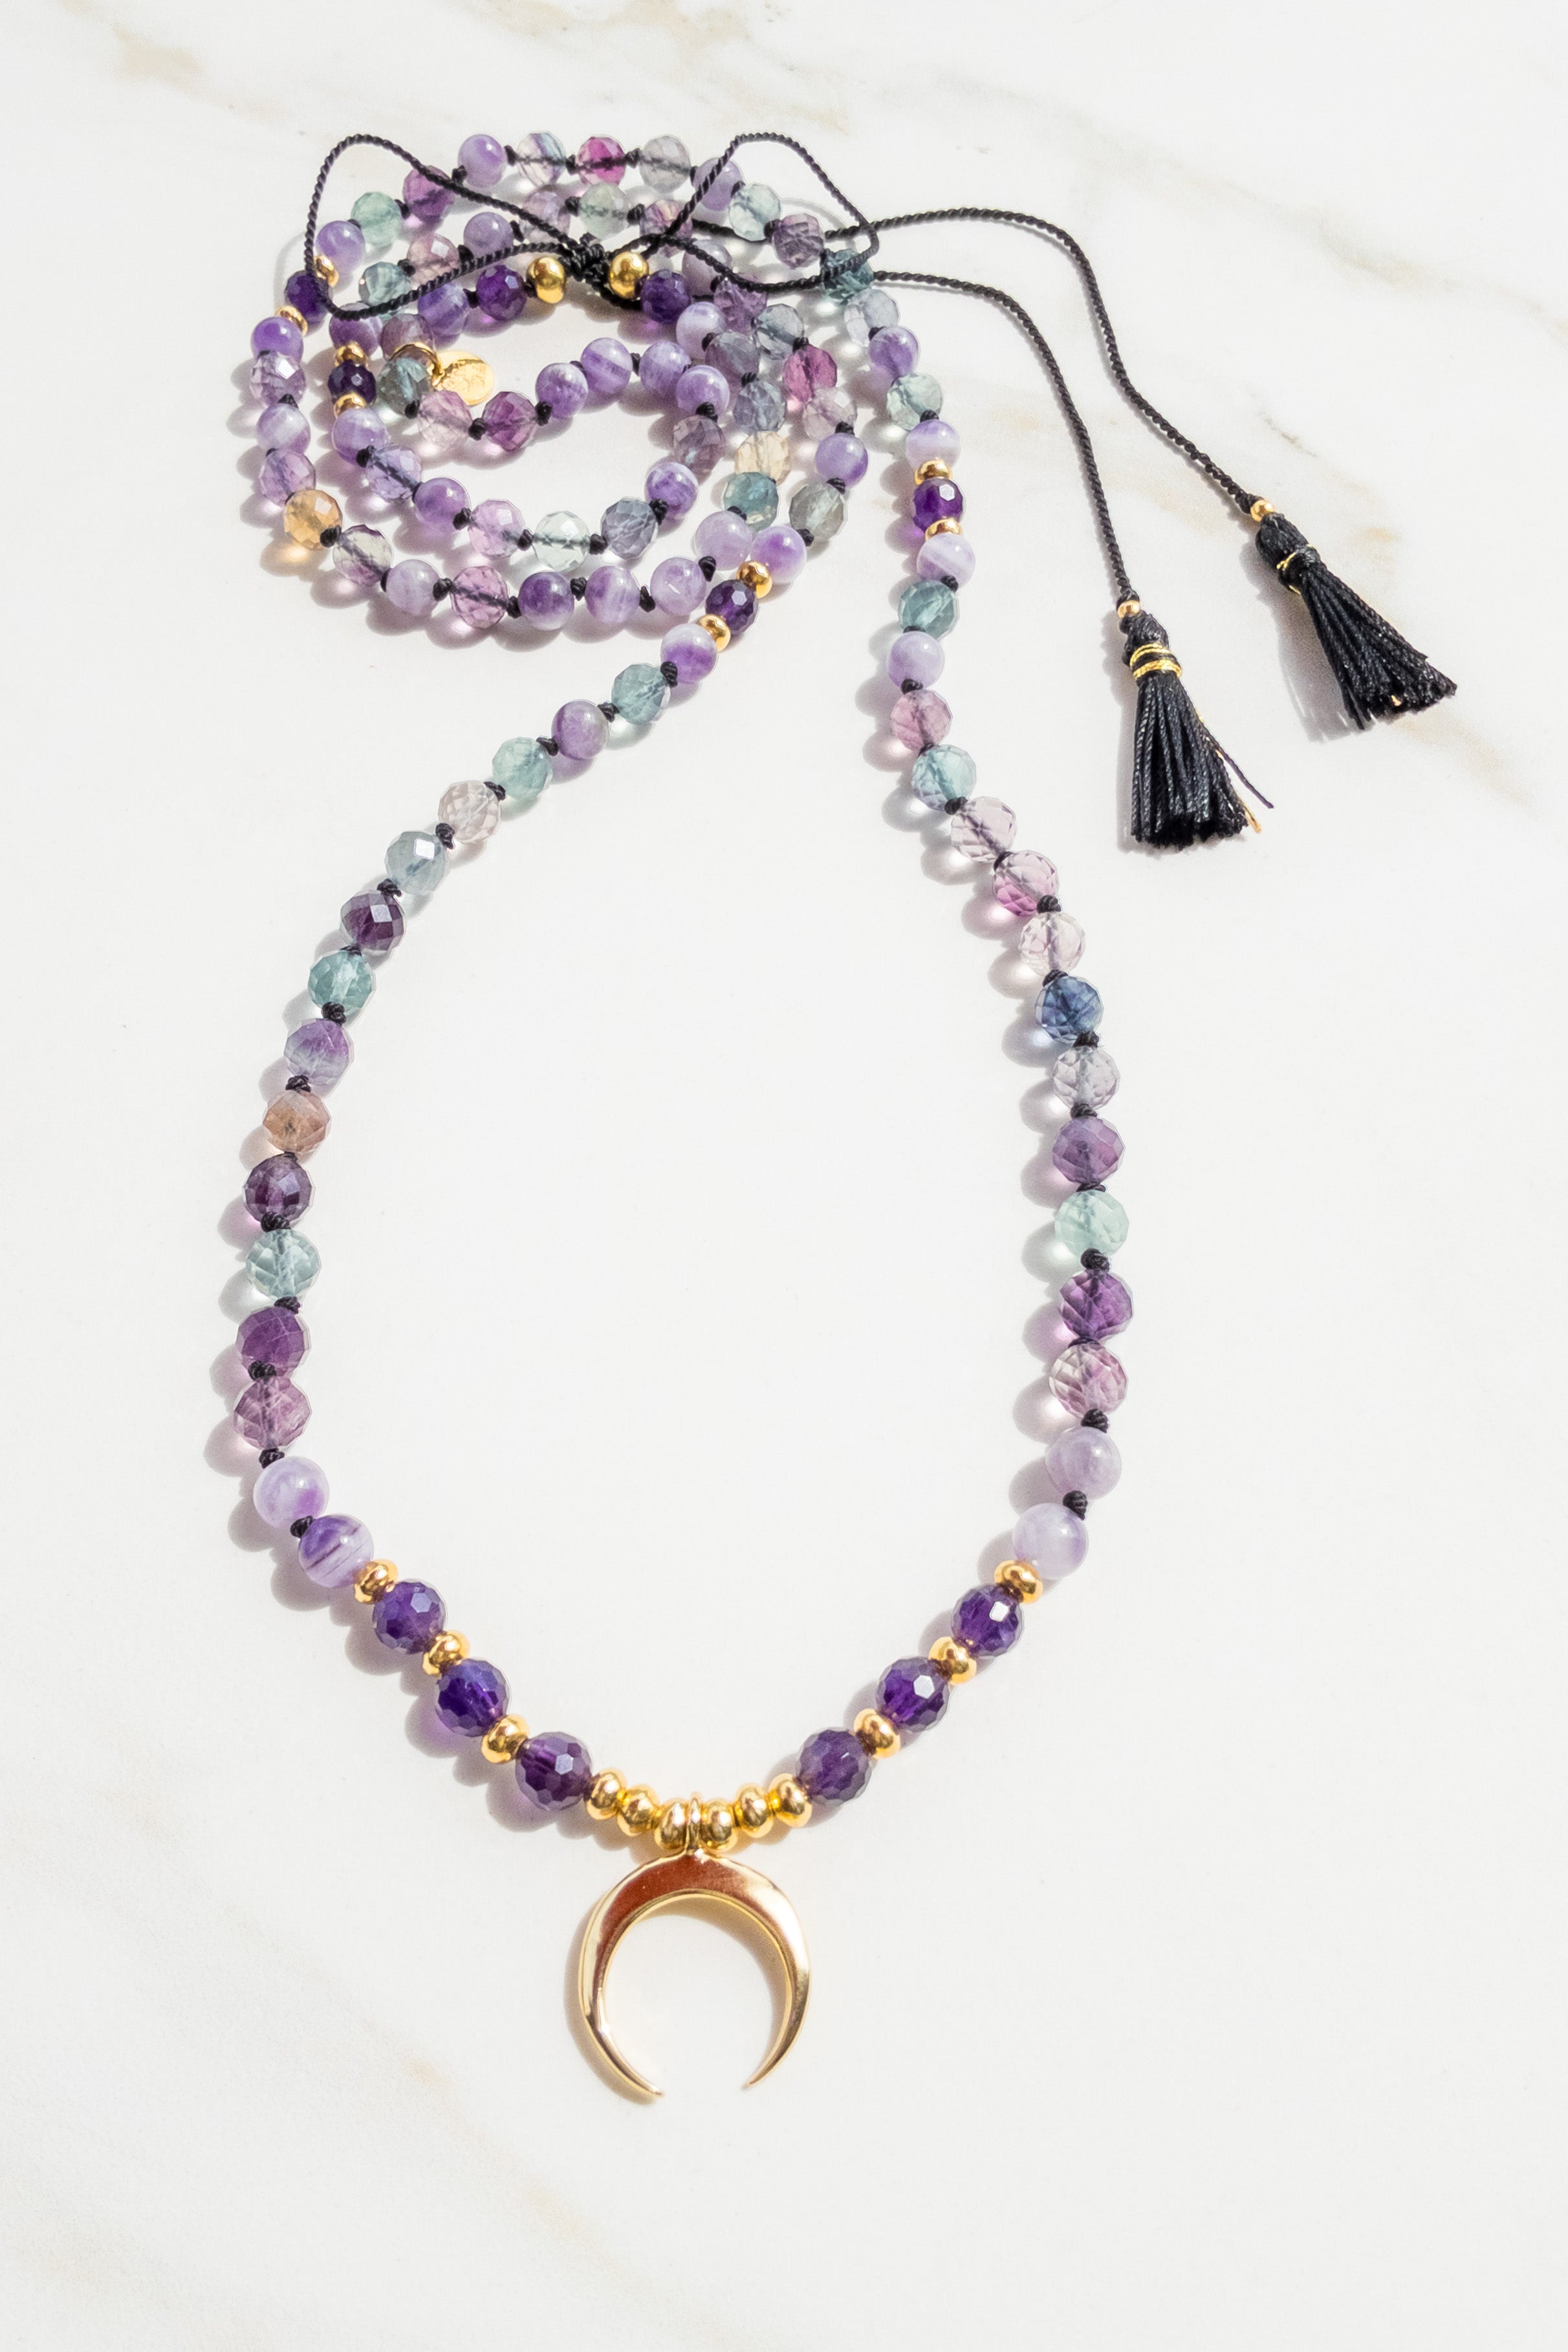 The Starry Serenity Mala Necklace - Fluorite & Amethyst - Indradhanush Collection